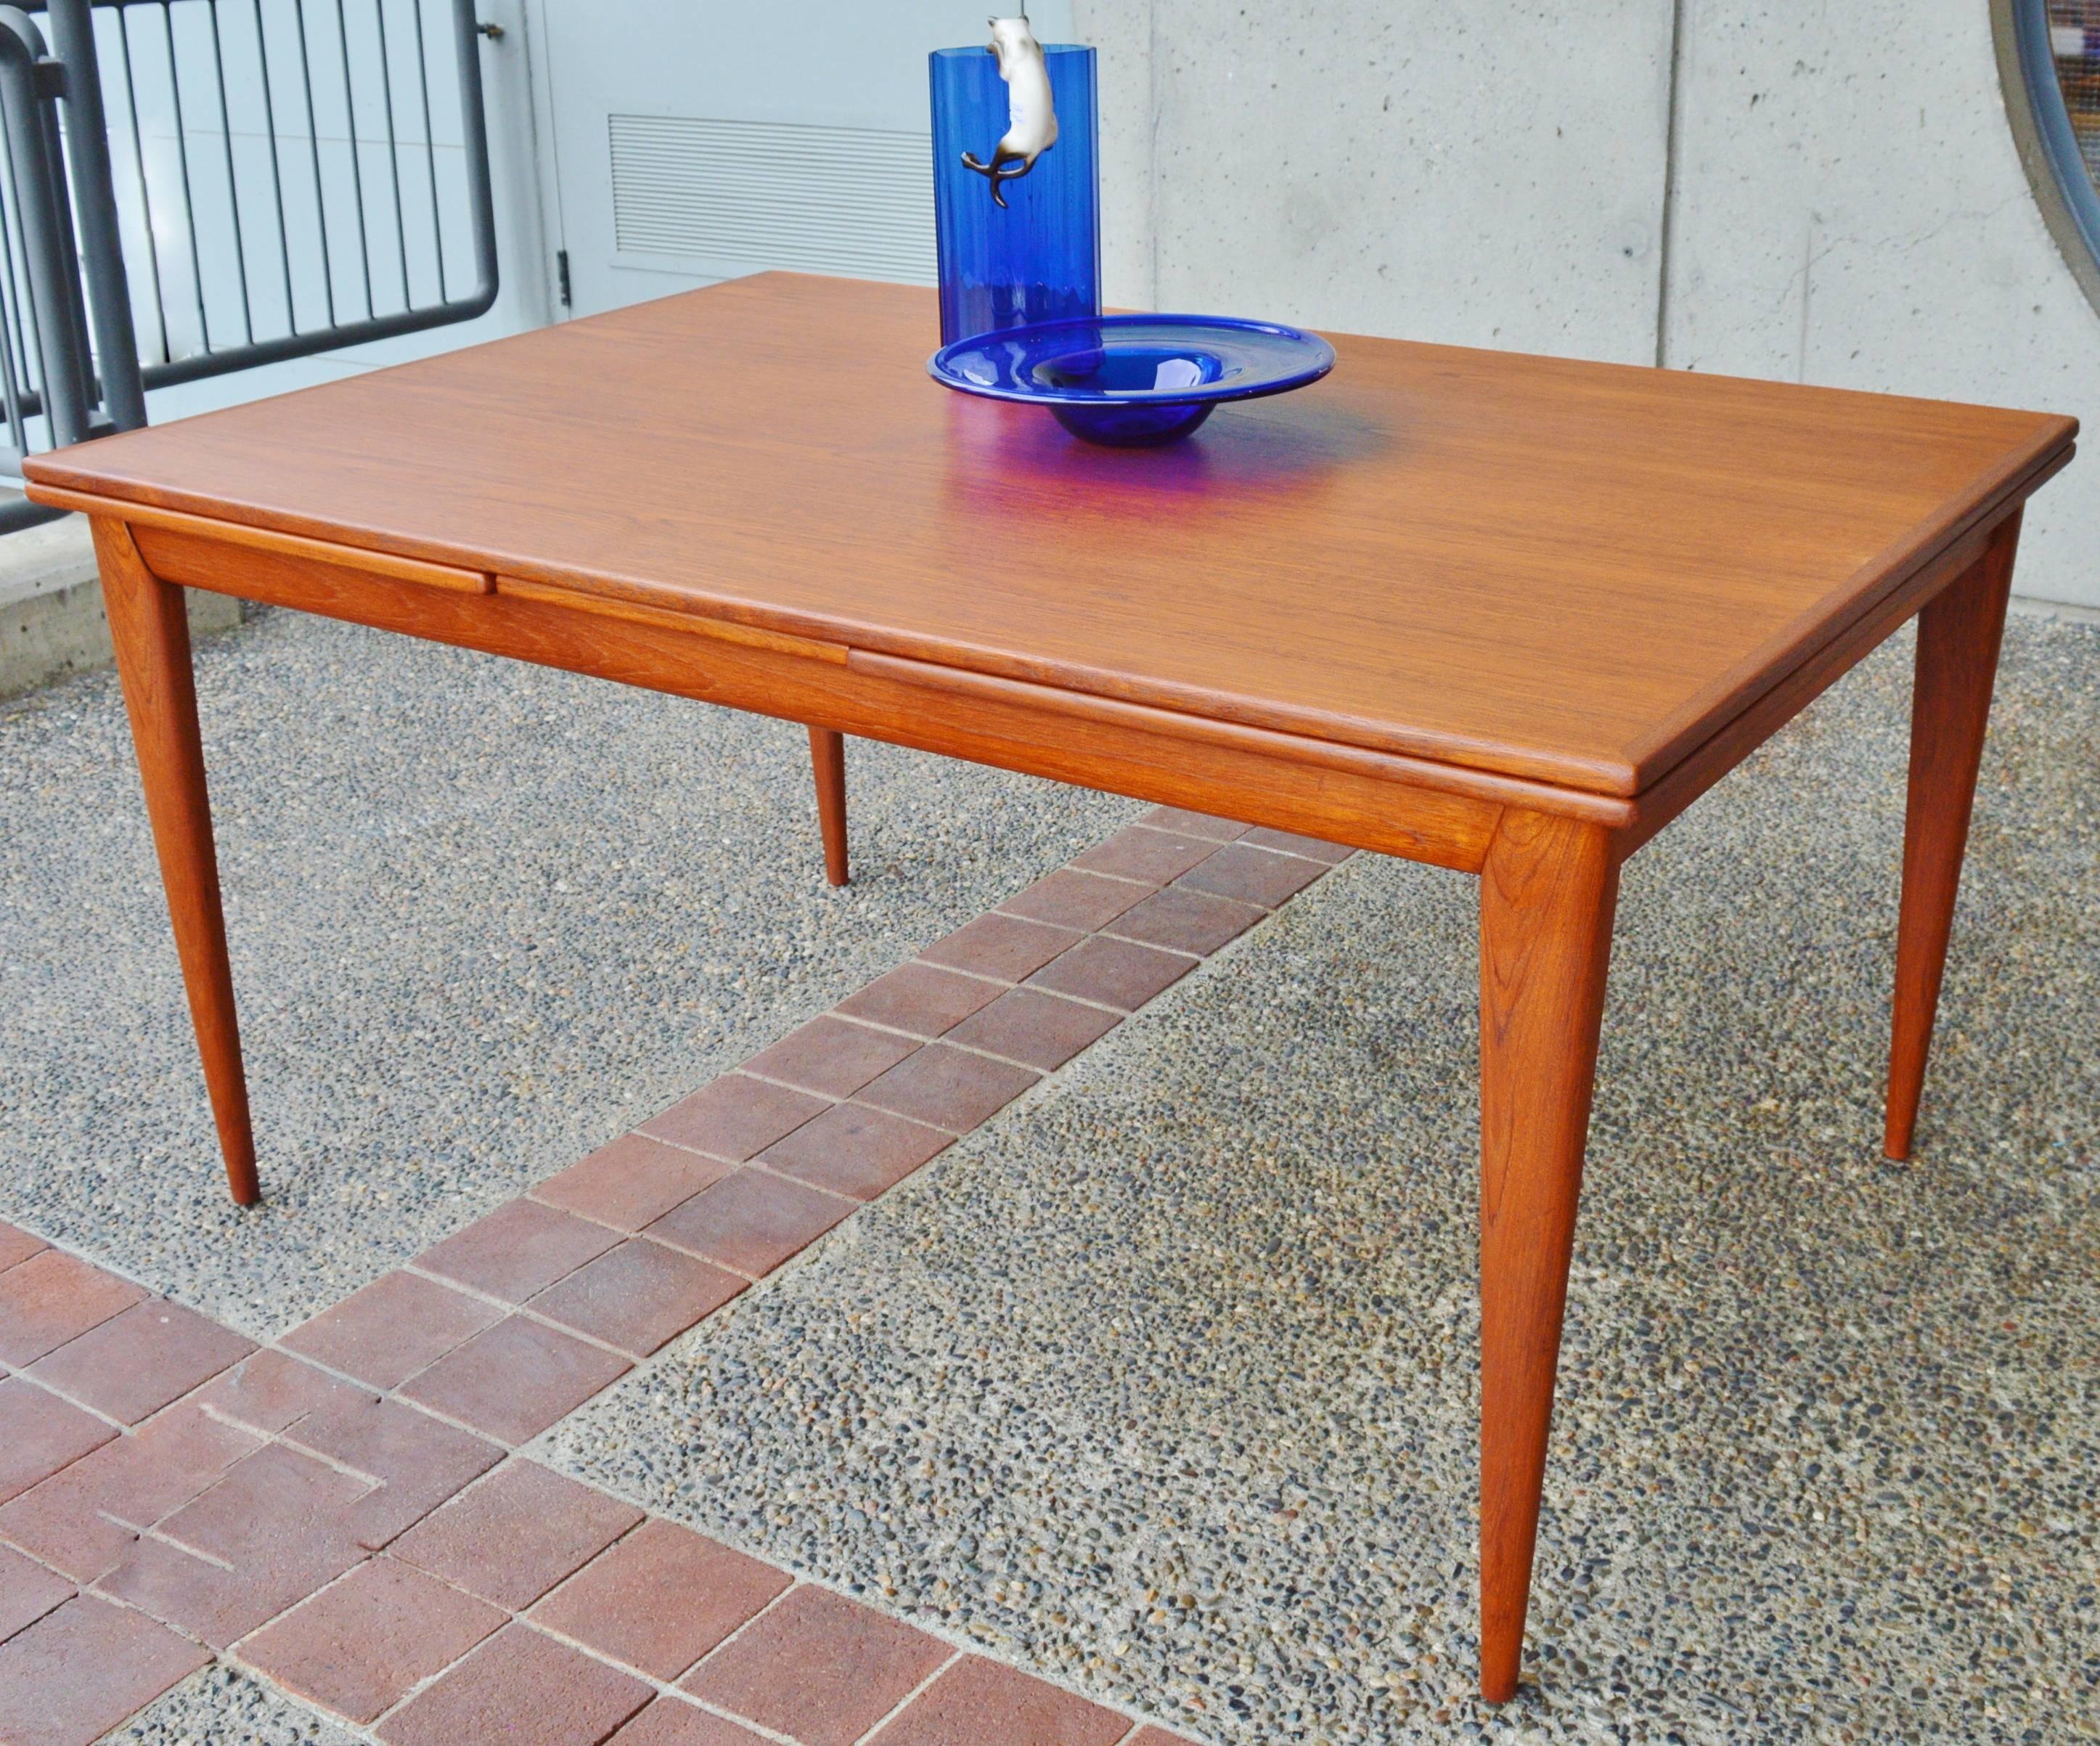 Mid-20th Century Impeccable No Moller Rare Teak Extending Dining Table with Sexy Apron and Legs